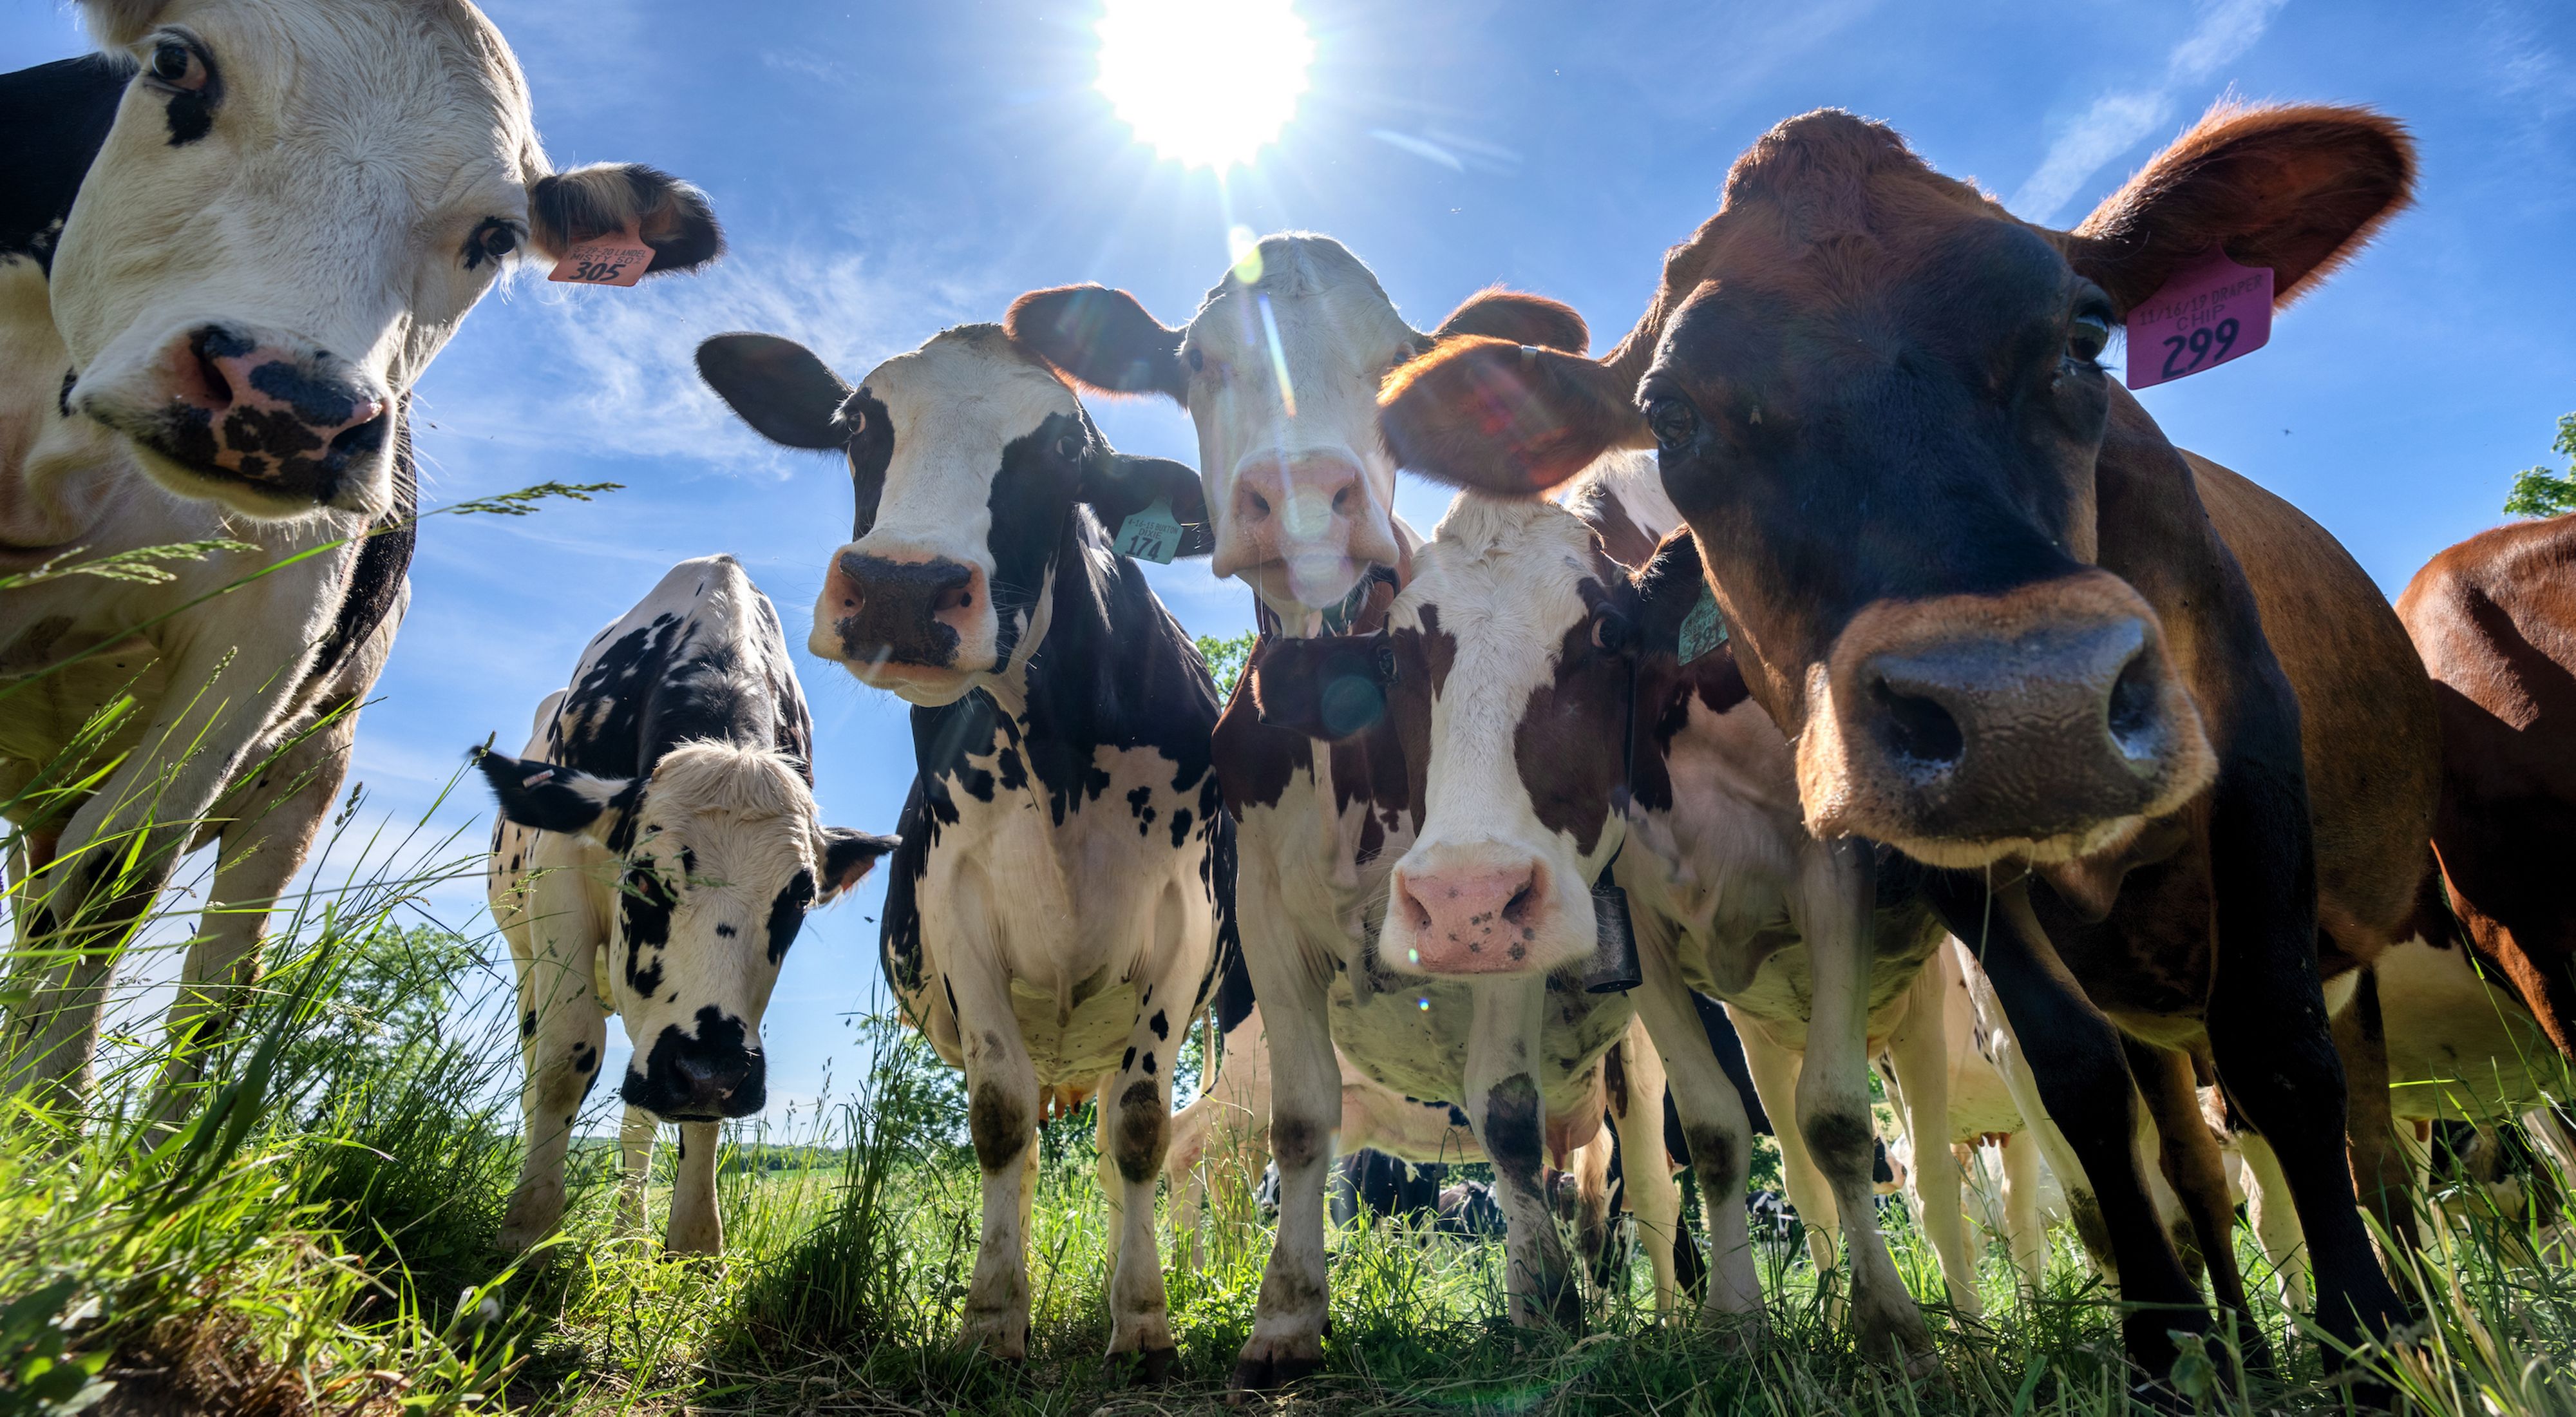 A group of cows look down into the camera, which is placed on the ground, on a Wisconsin farm.